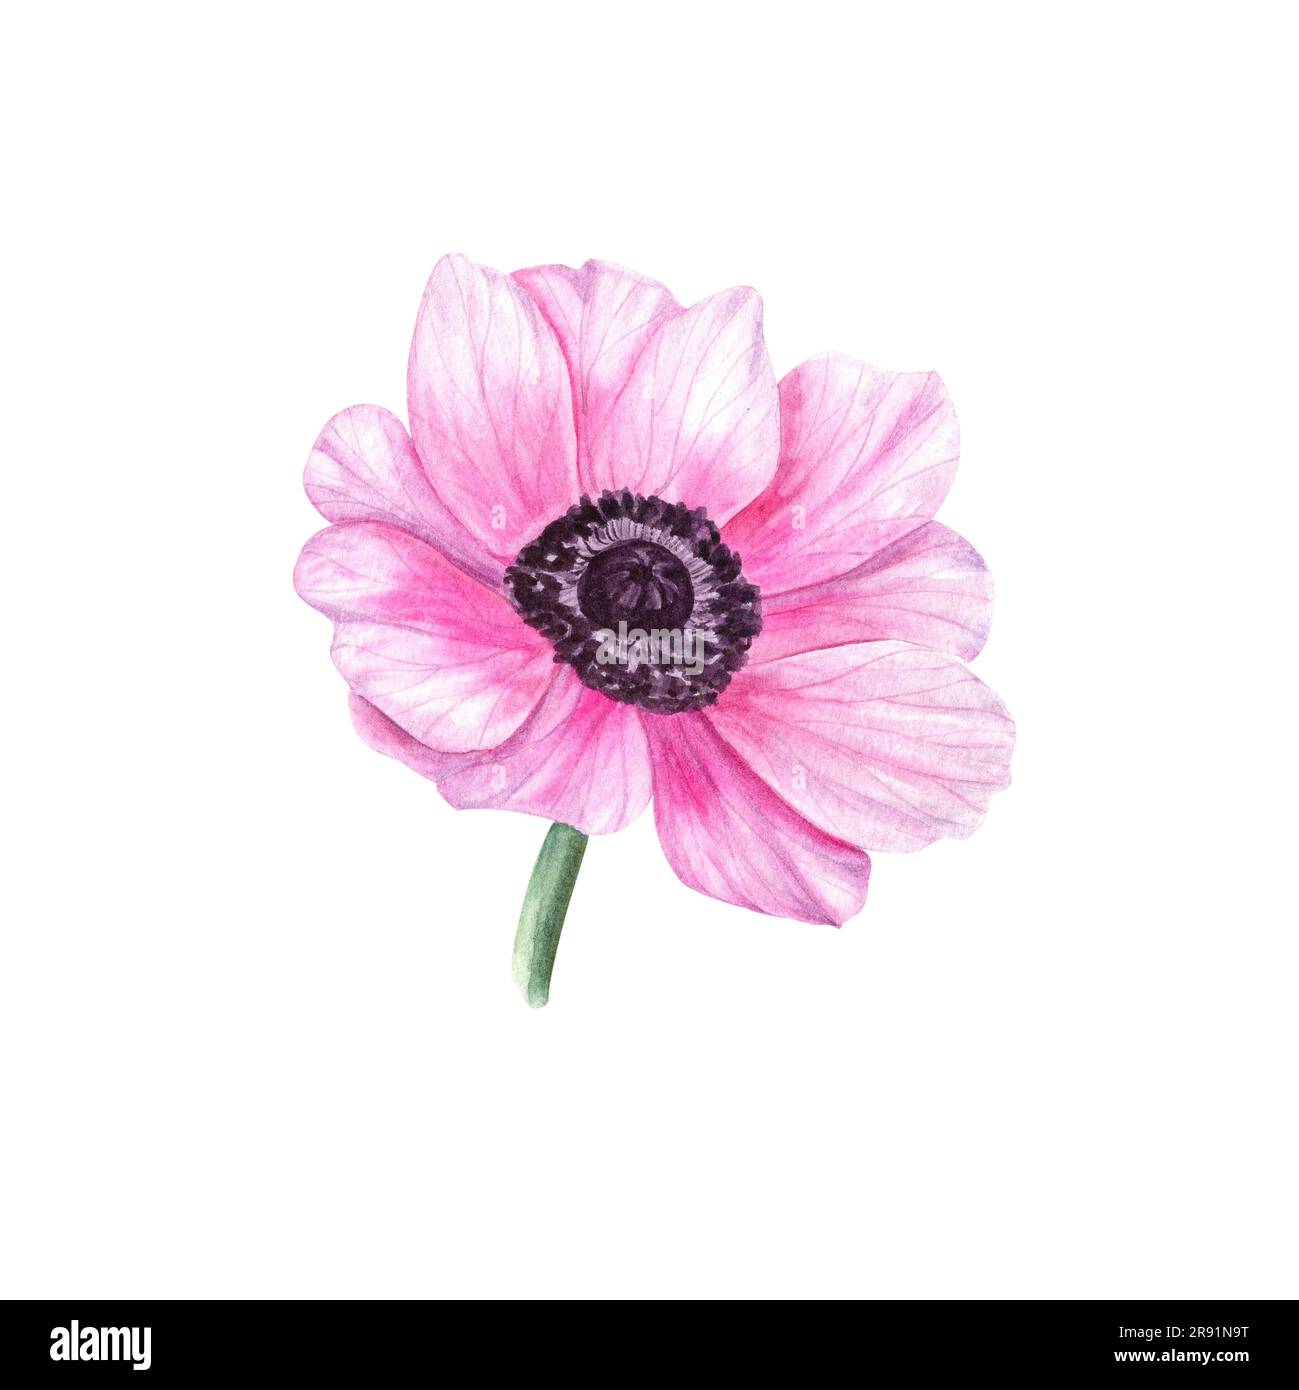 Pink anemone isolated on white background. Floral spring element for create cards of Valentines day, birthday, mothers day, wedding invitation Stock Photo